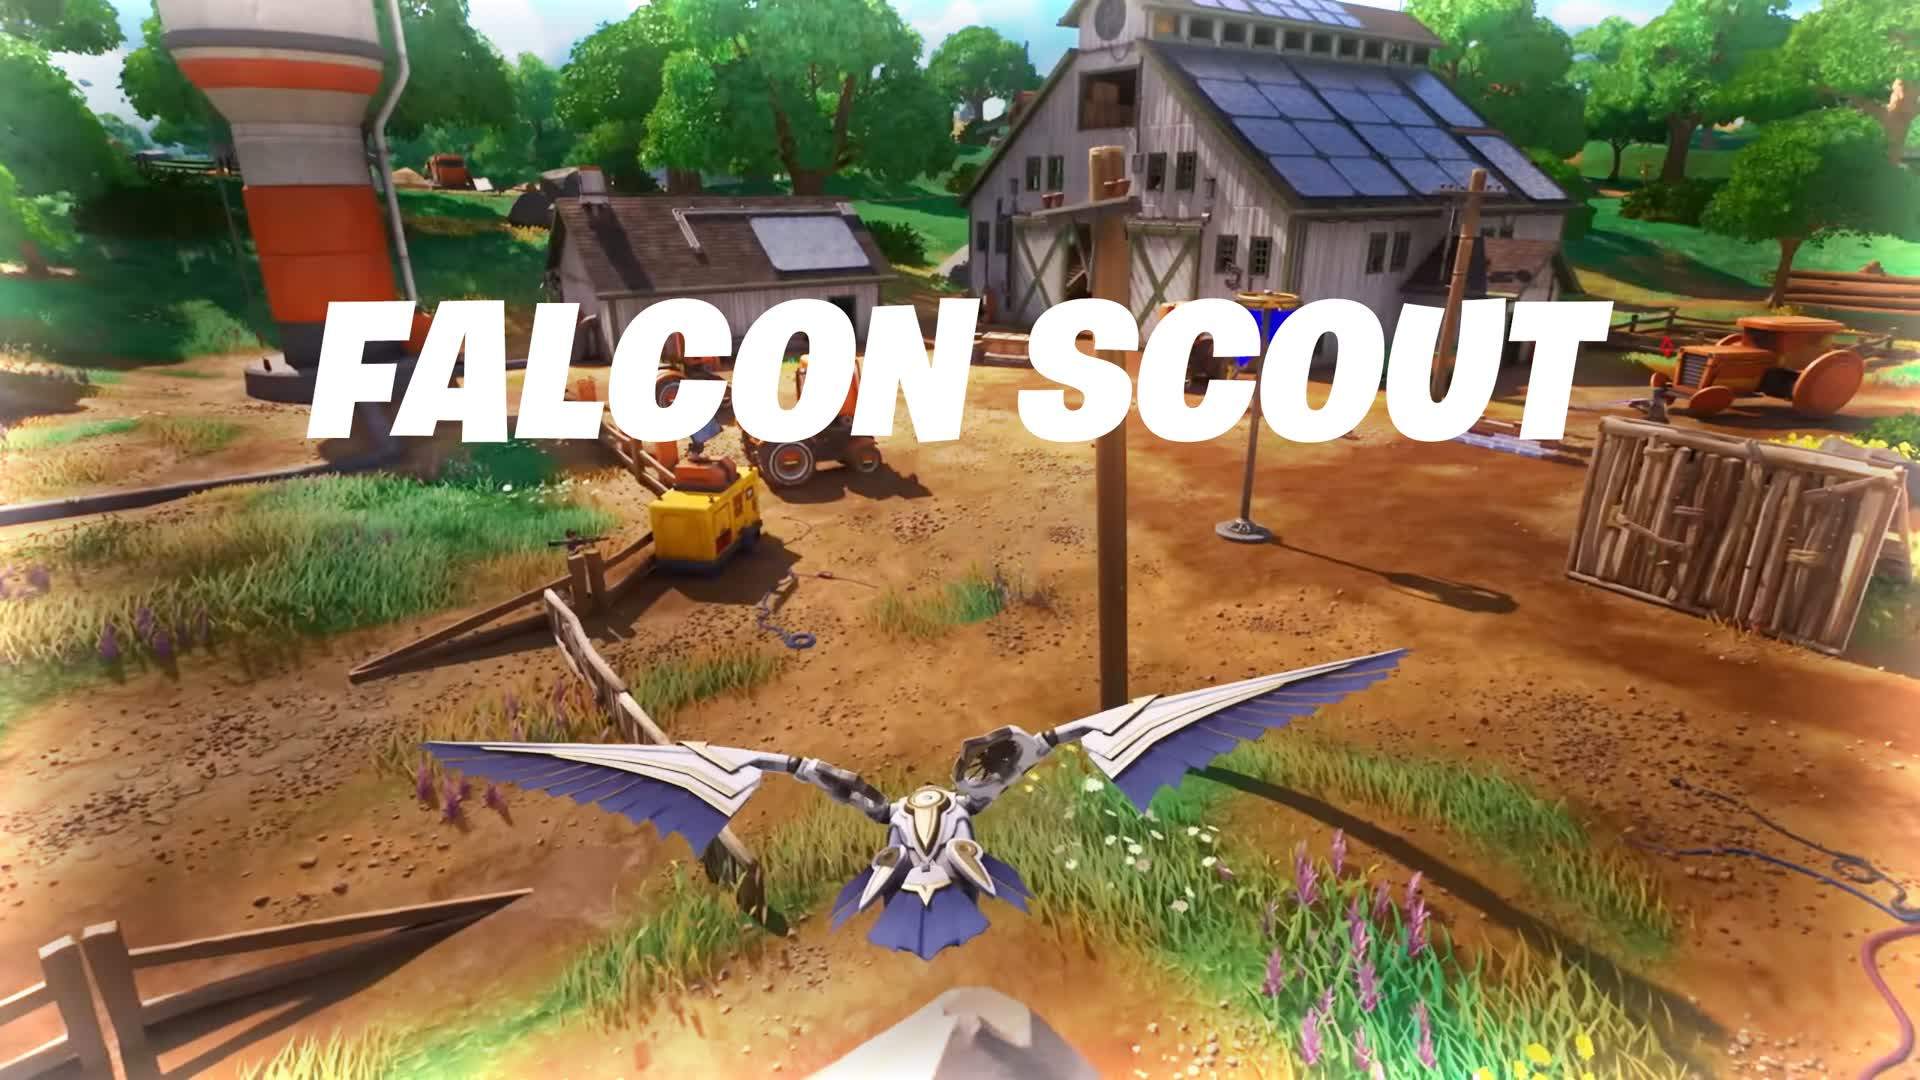 Falcon Scout - FREE FOR ALL